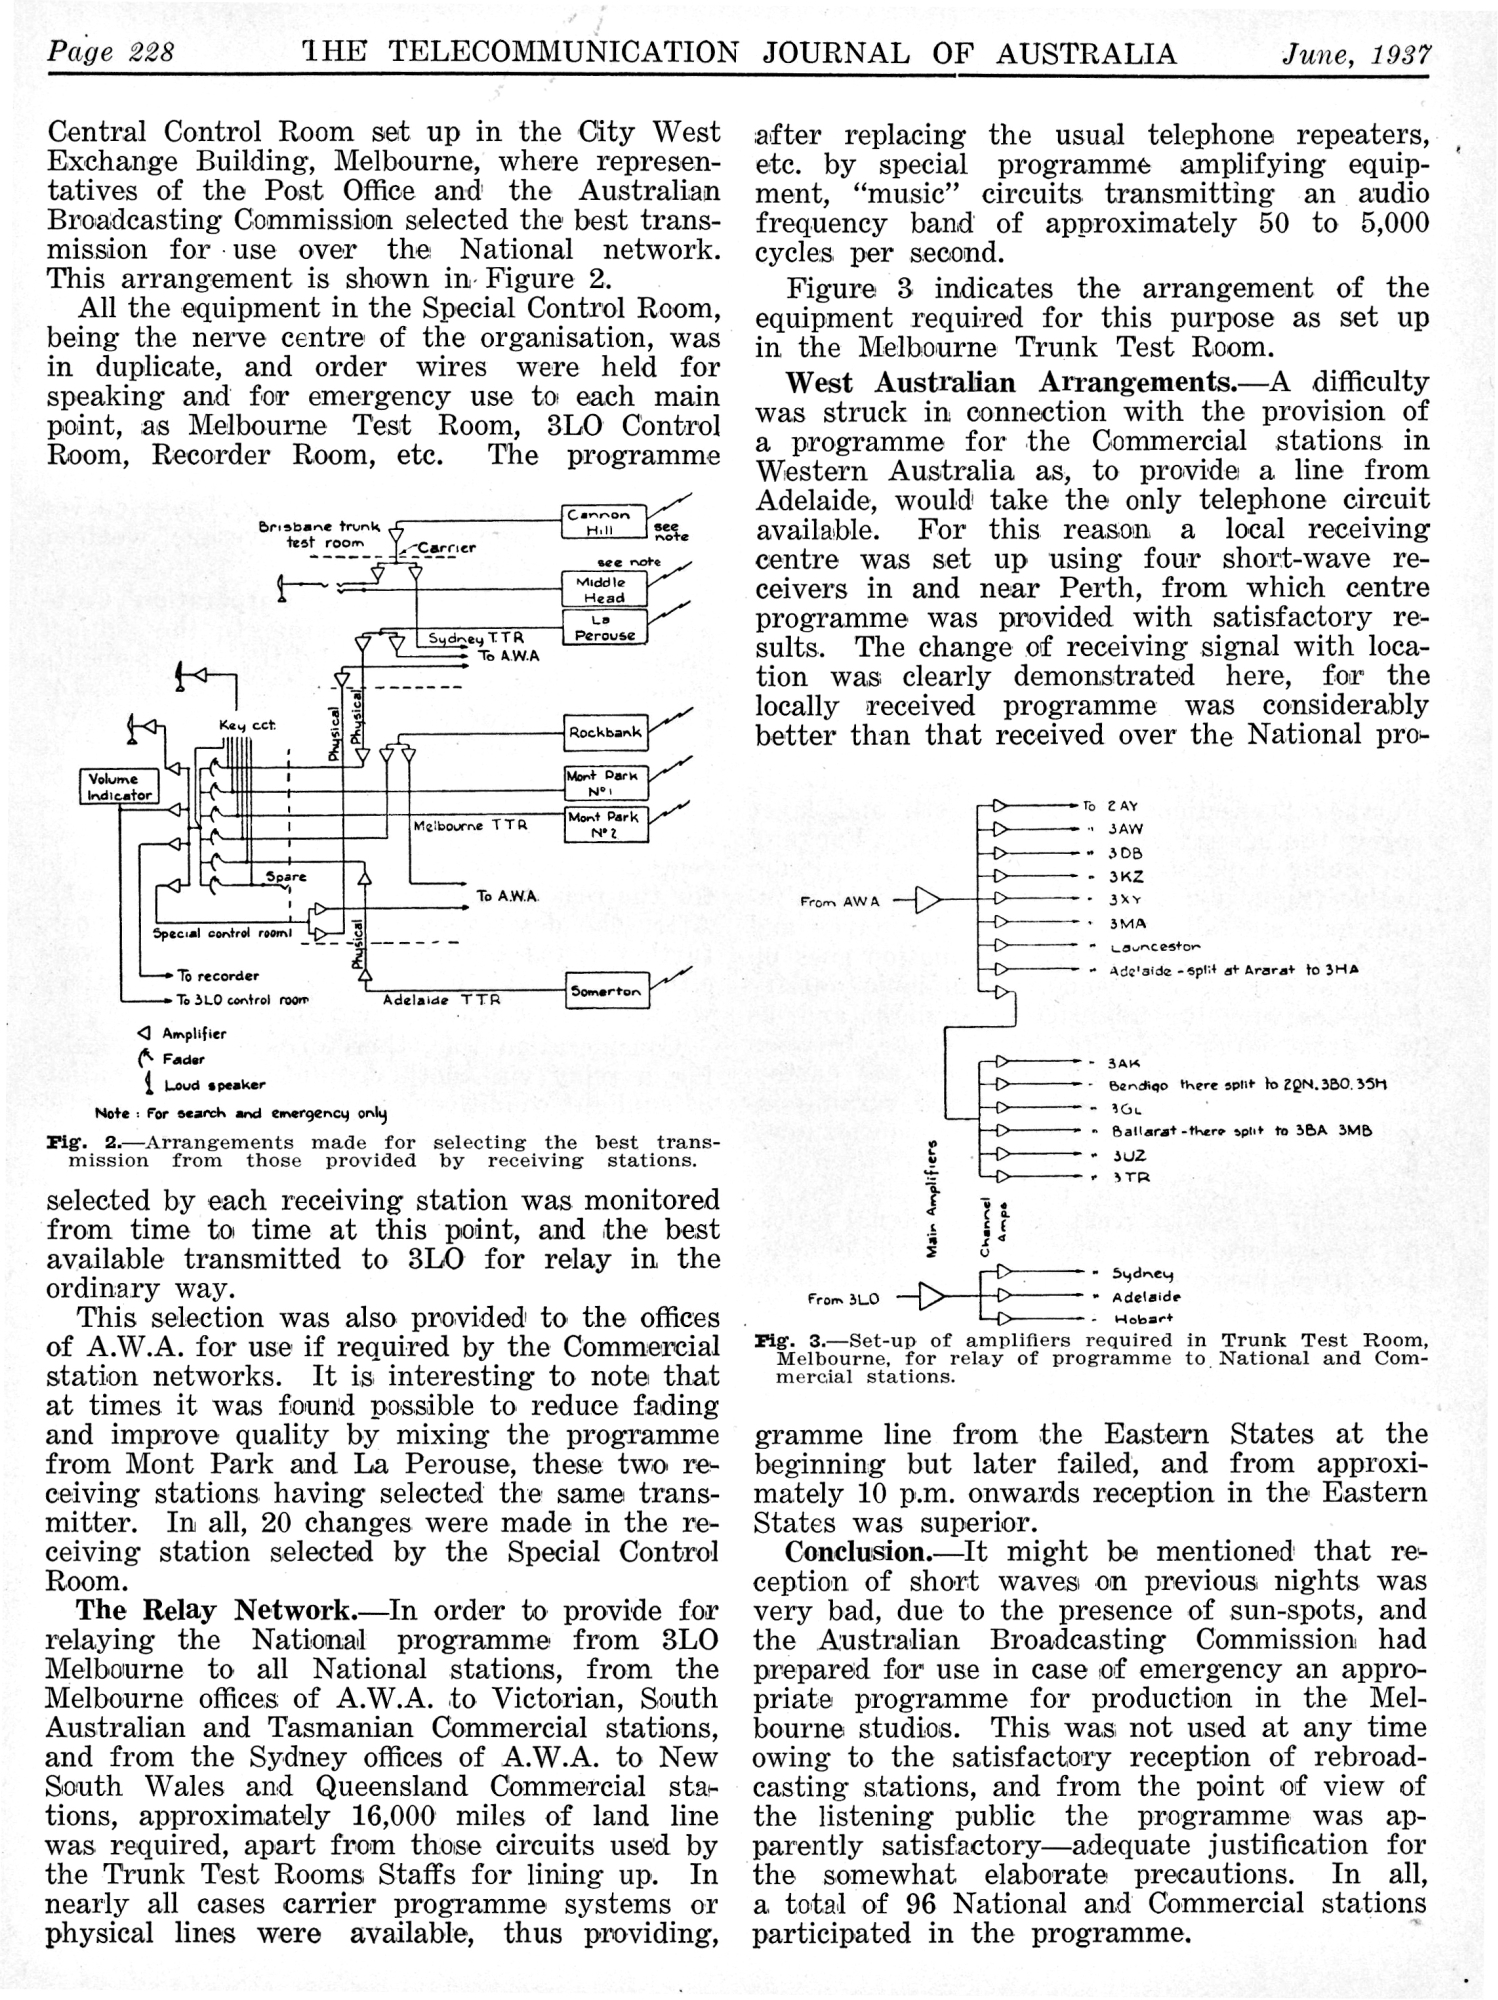 Page 2 of historical paper